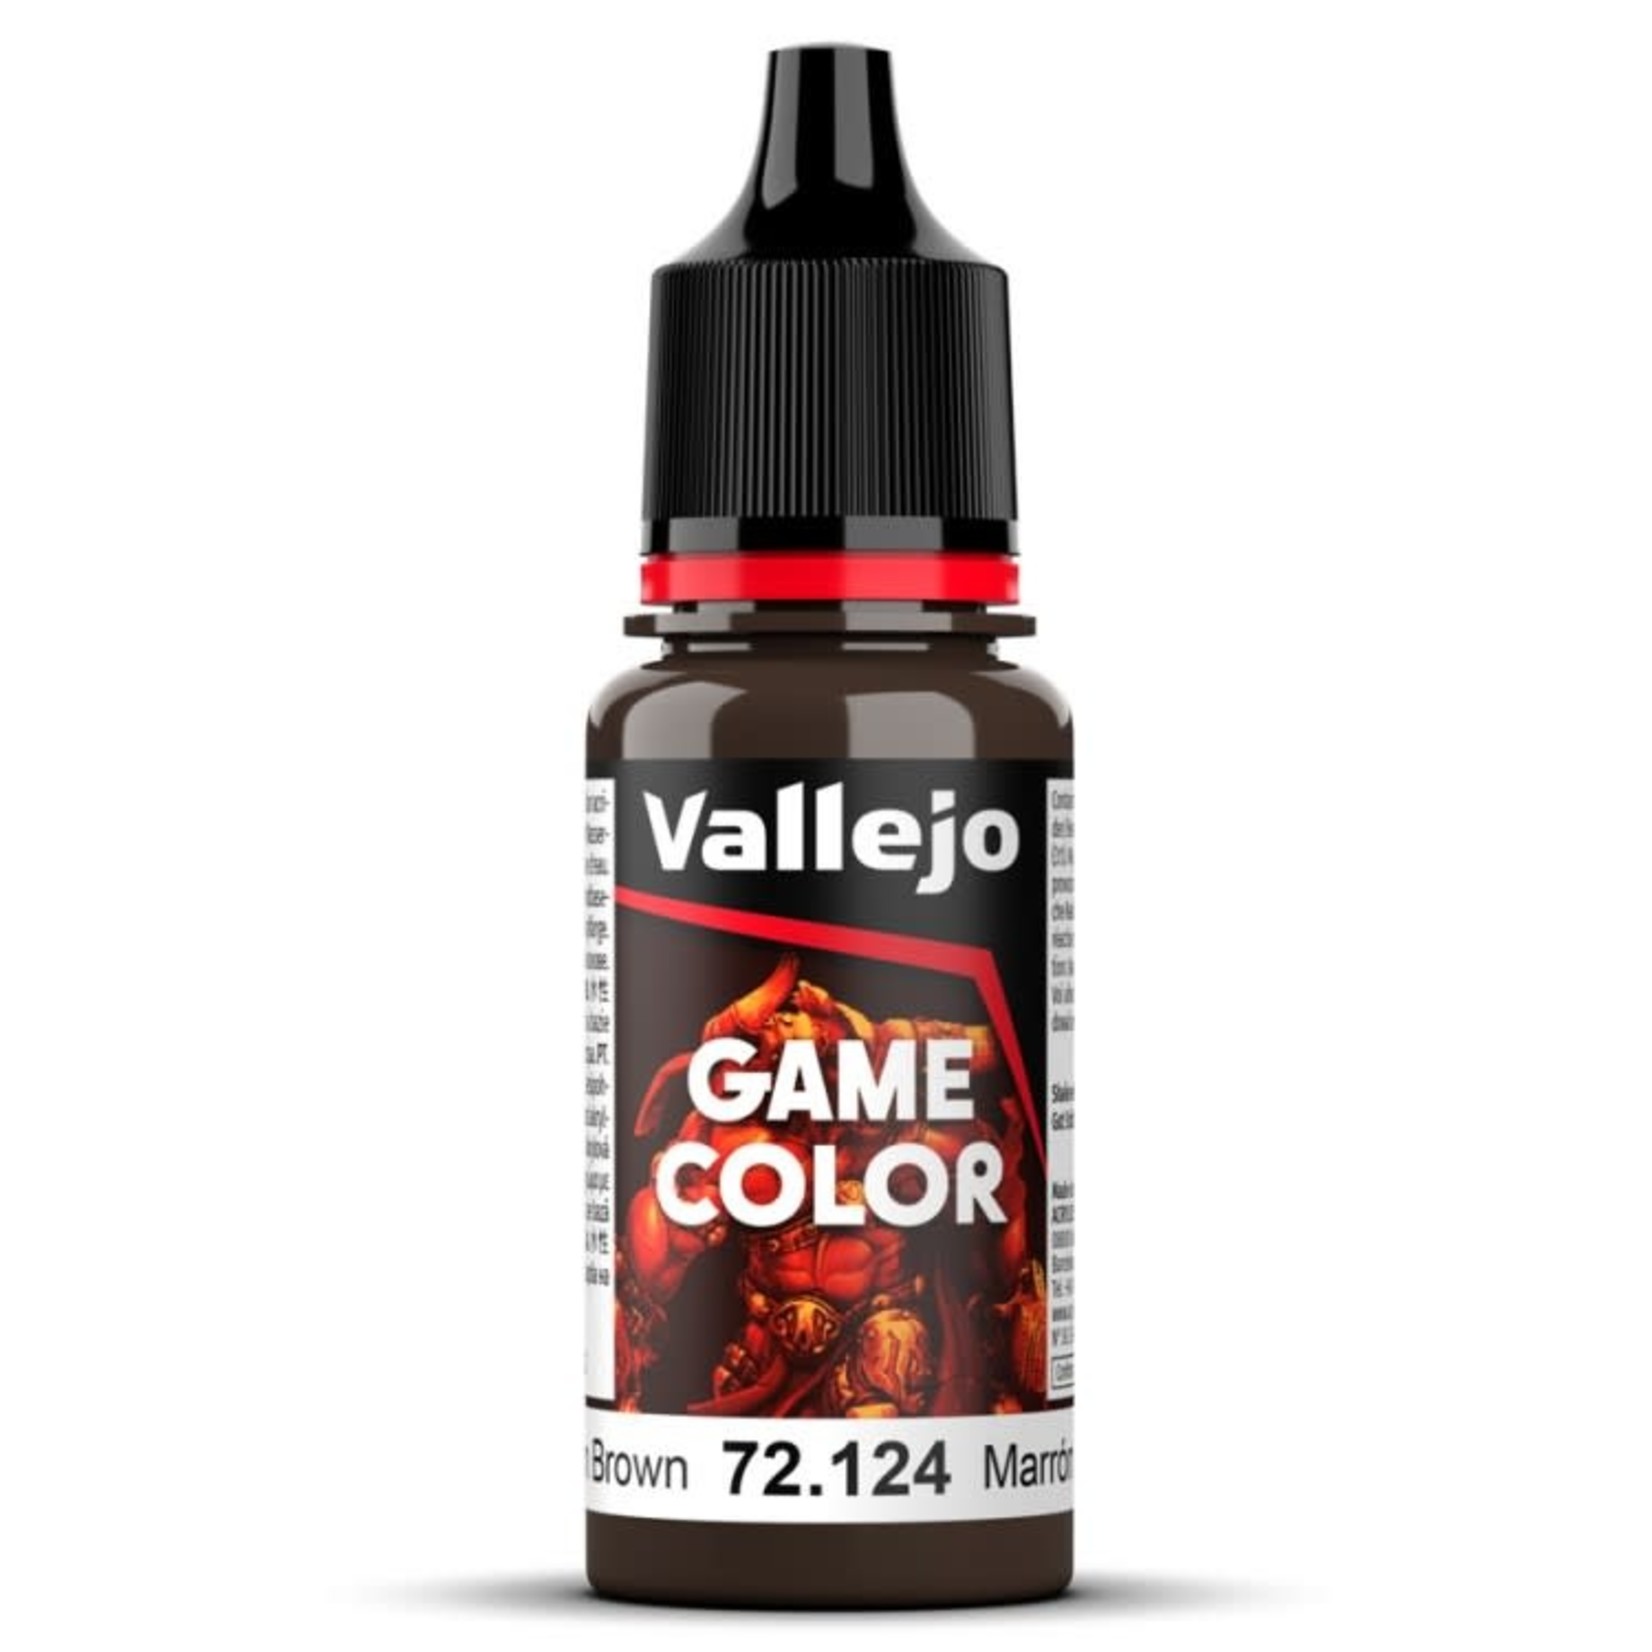 Vallejo Paint: Game Color (Gorgon Brown)